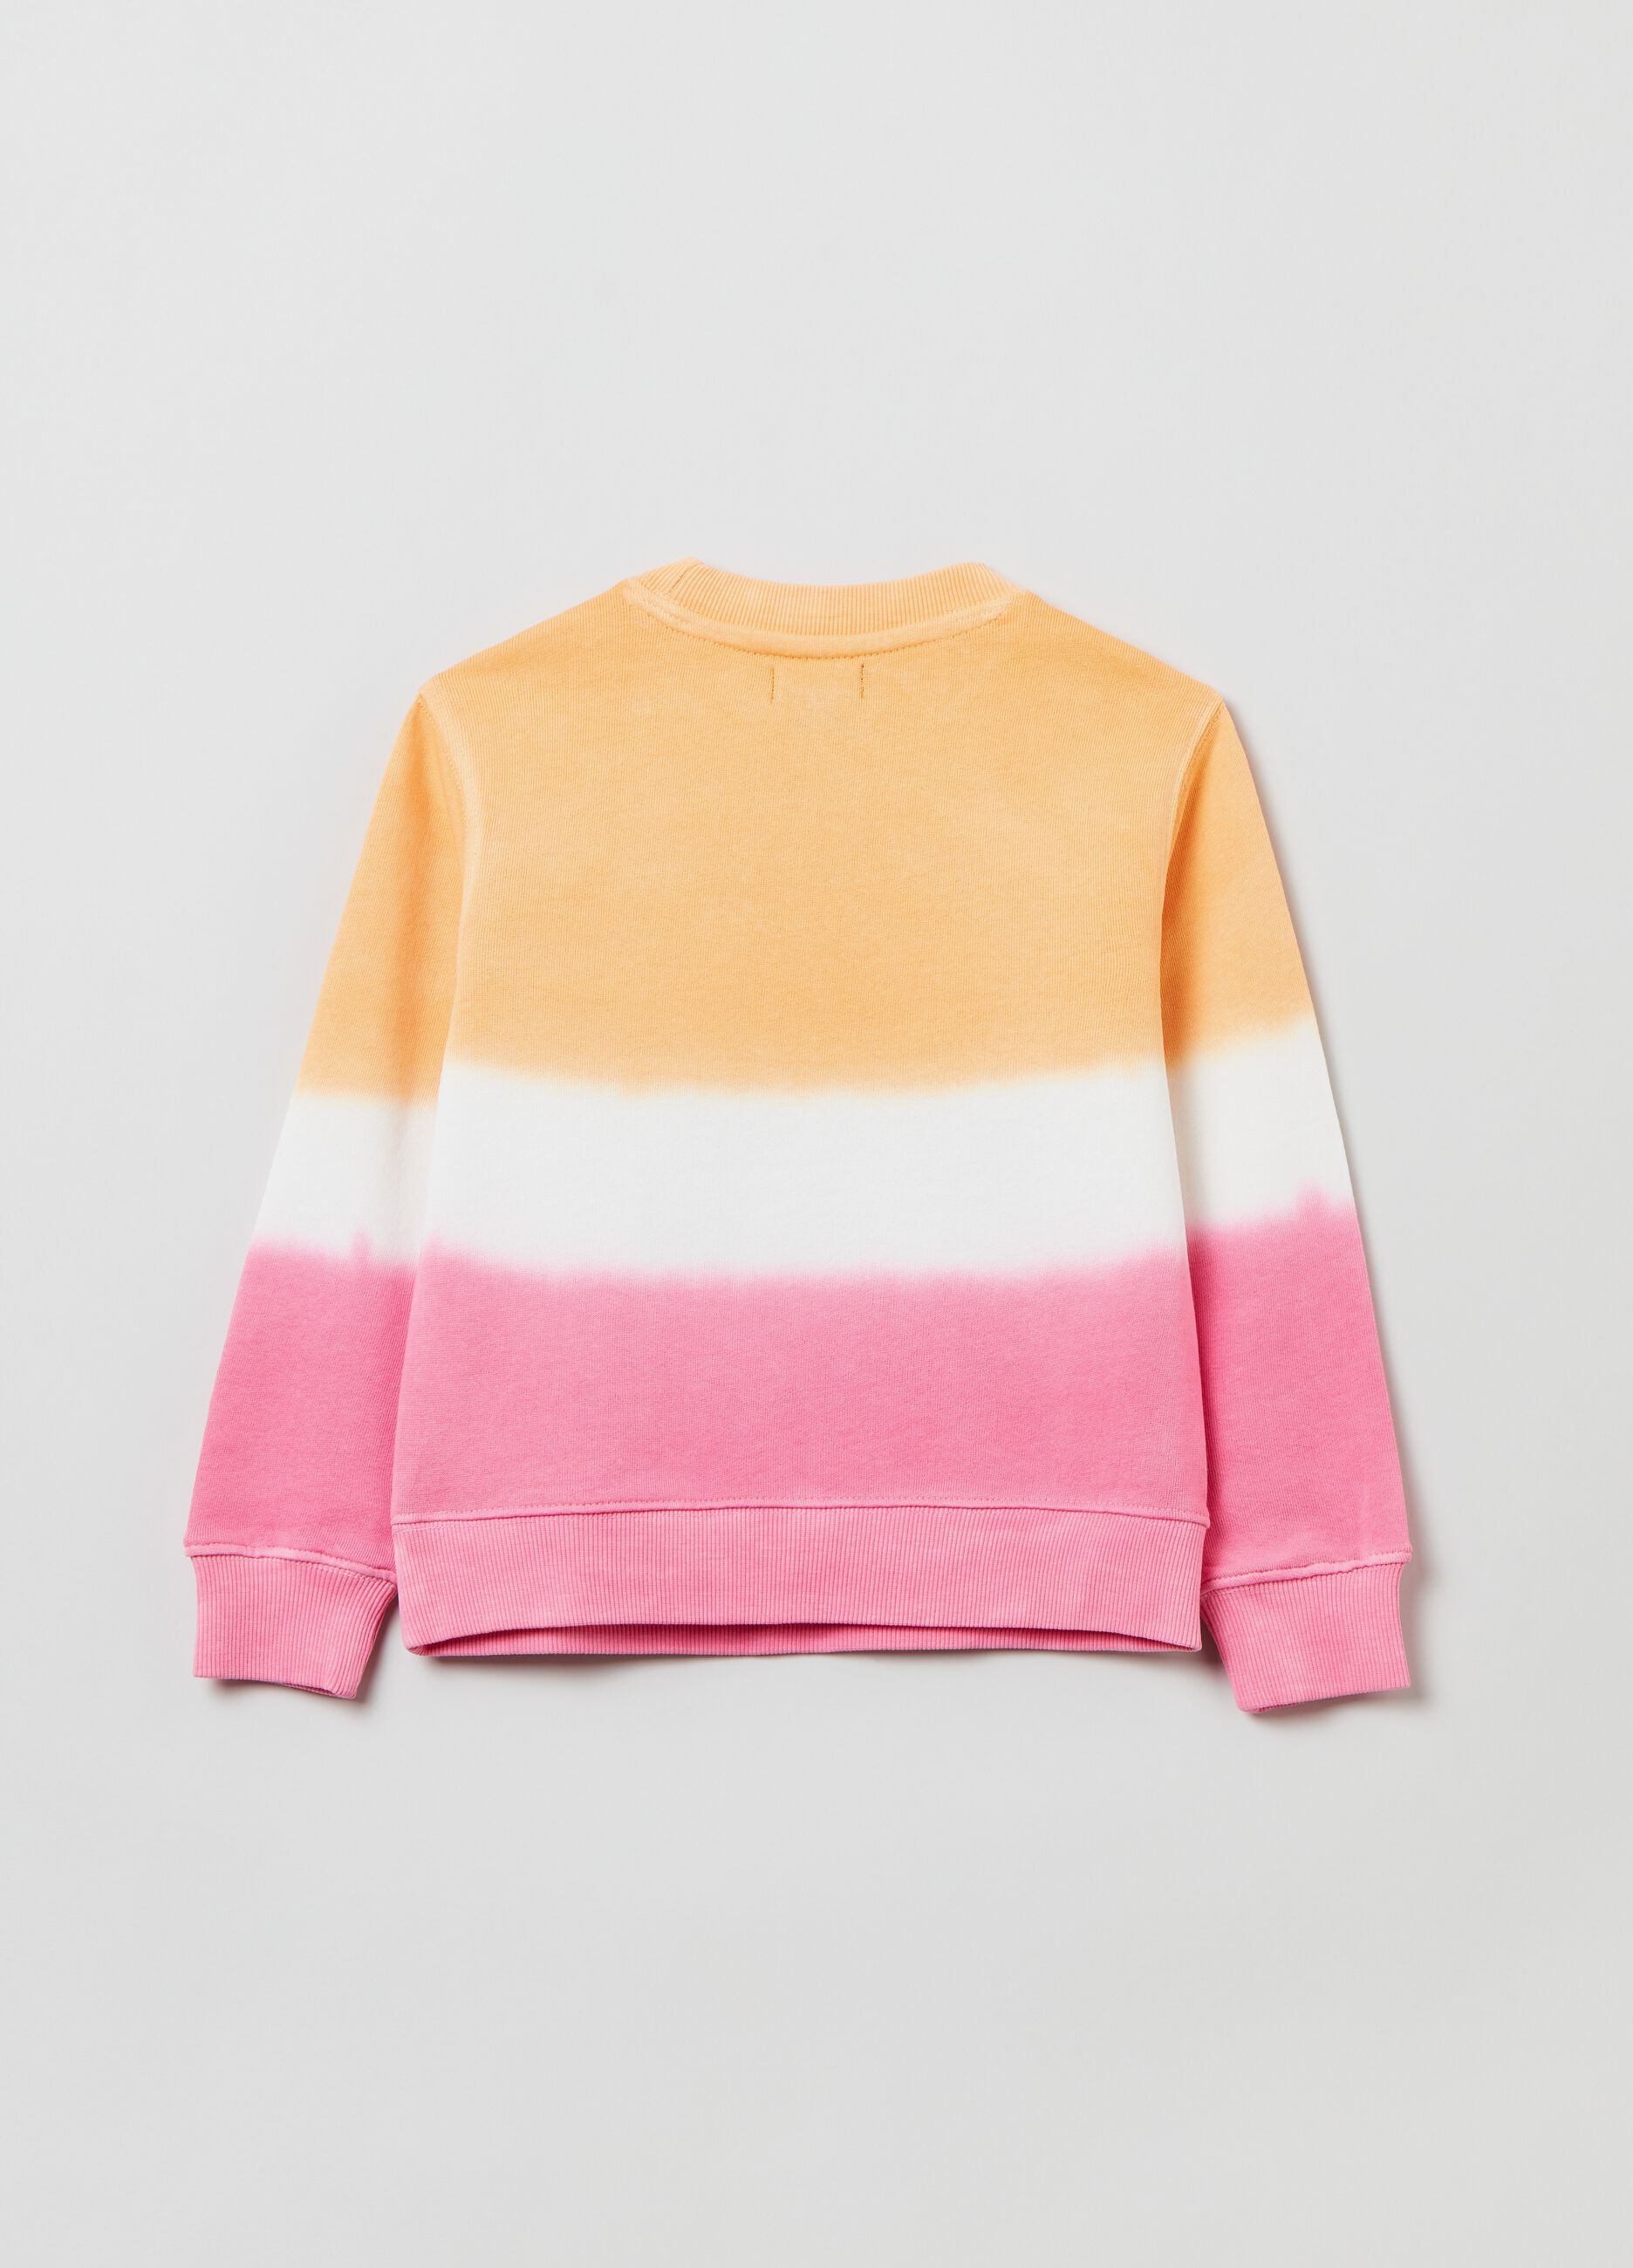 Sweatshirt with dip dye pattern and embroidery